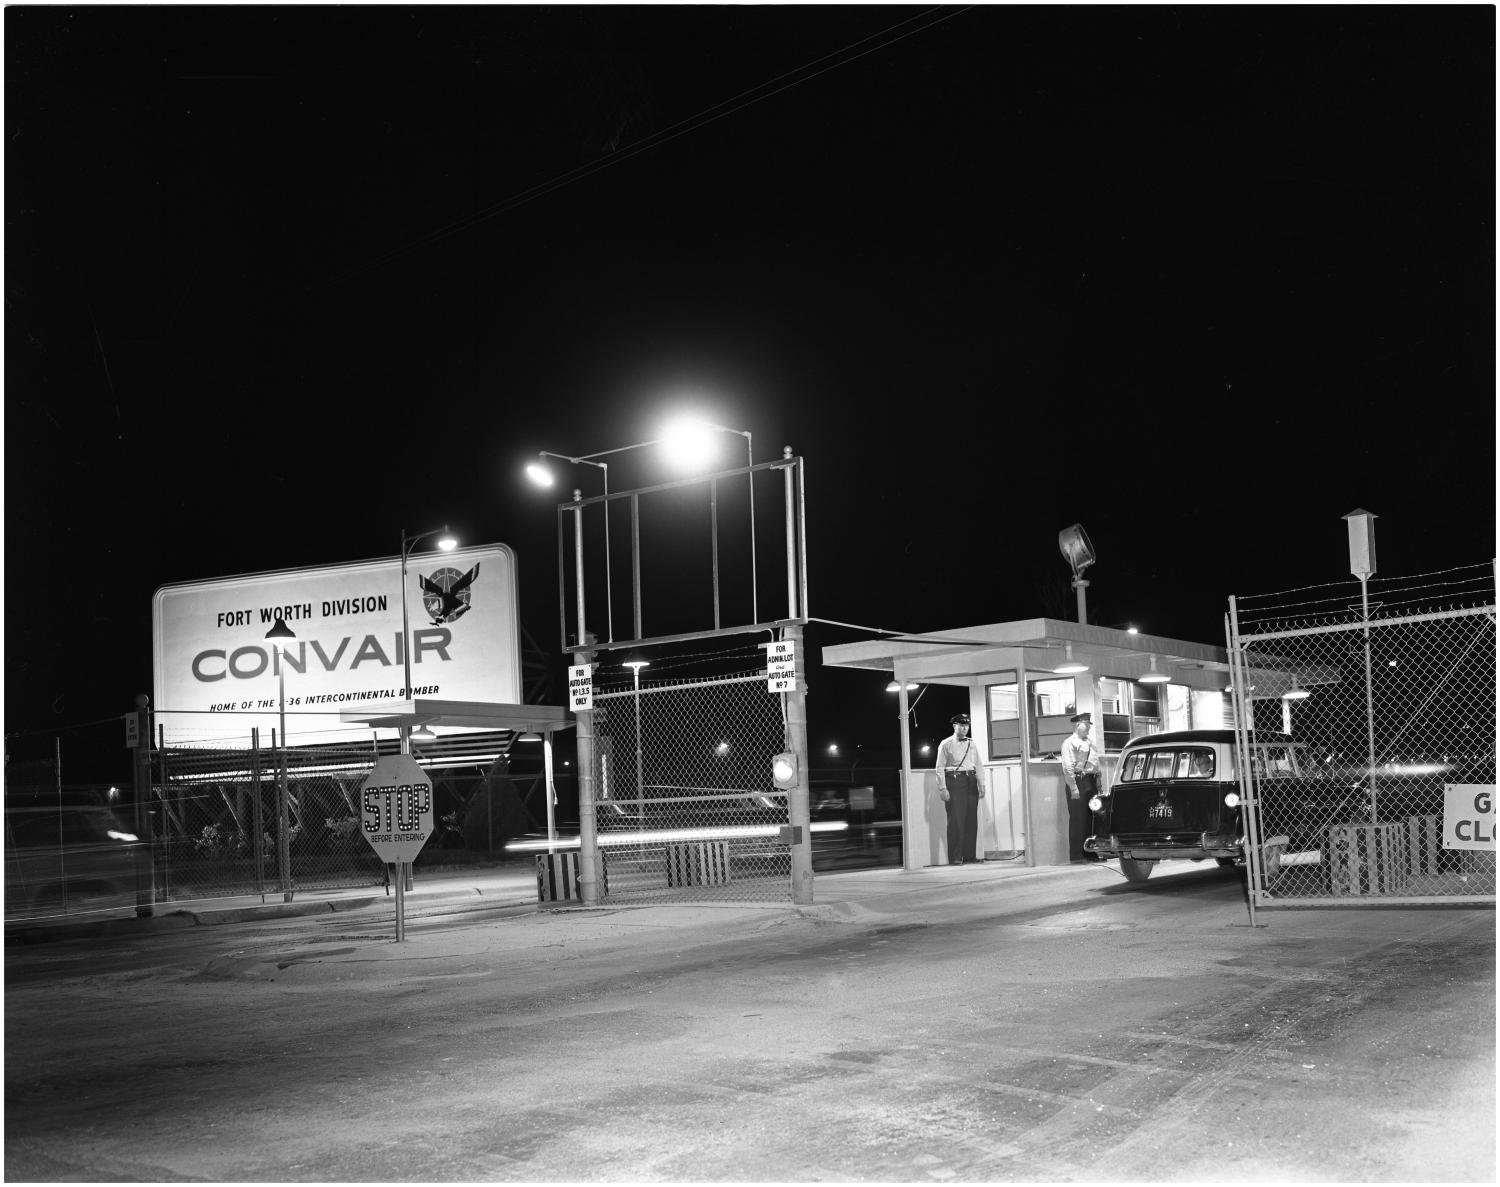 Car Entering Convair's Main Gate at Night
                                                
                                                    [Sequence #]: 1 of 1
                                                